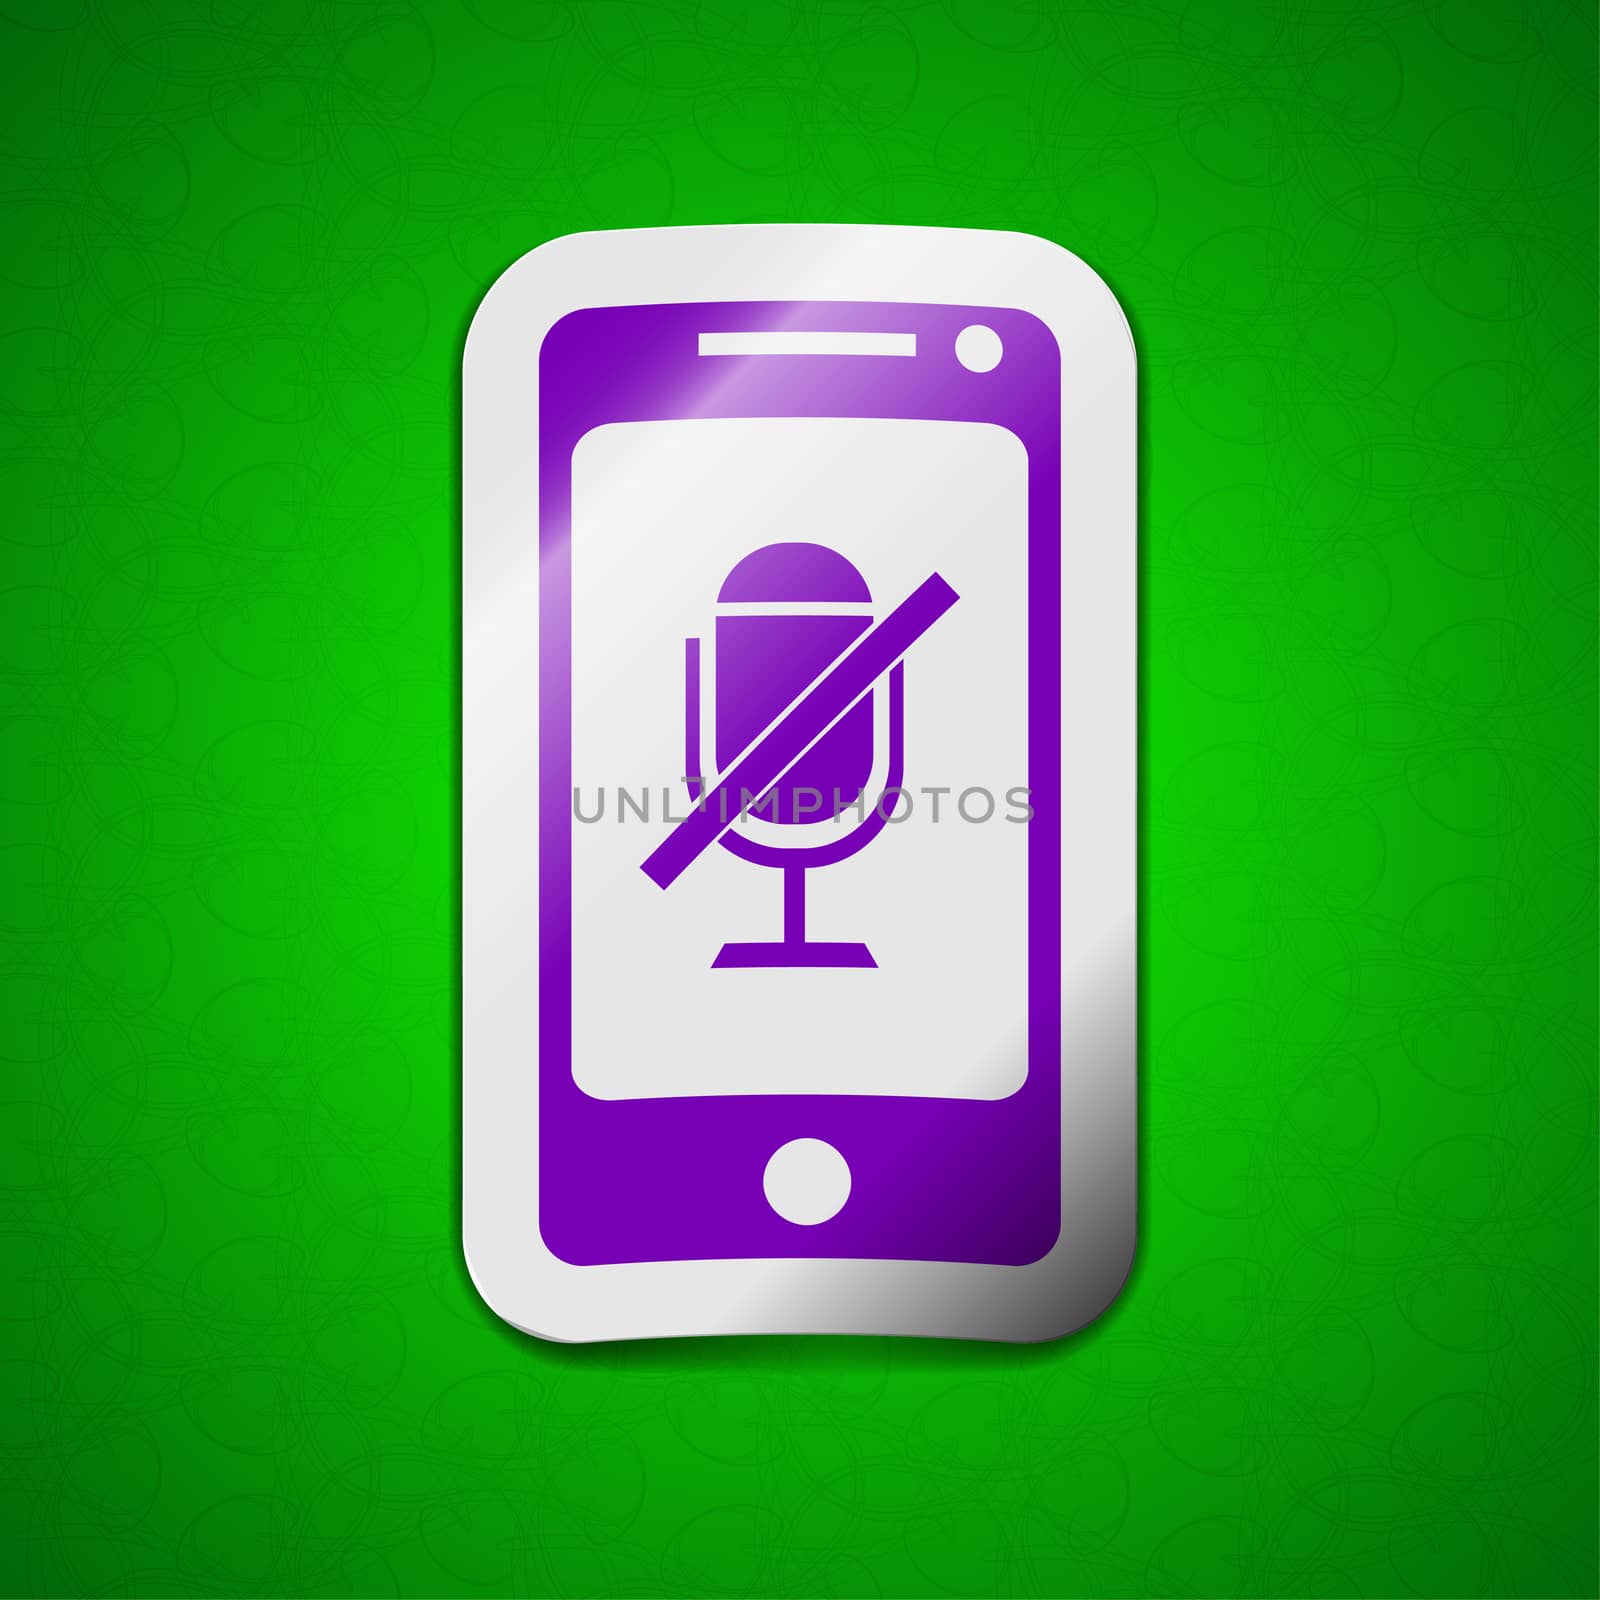 No Microphone icon sign. Symbol chic colored sticky label on green background.  illustration